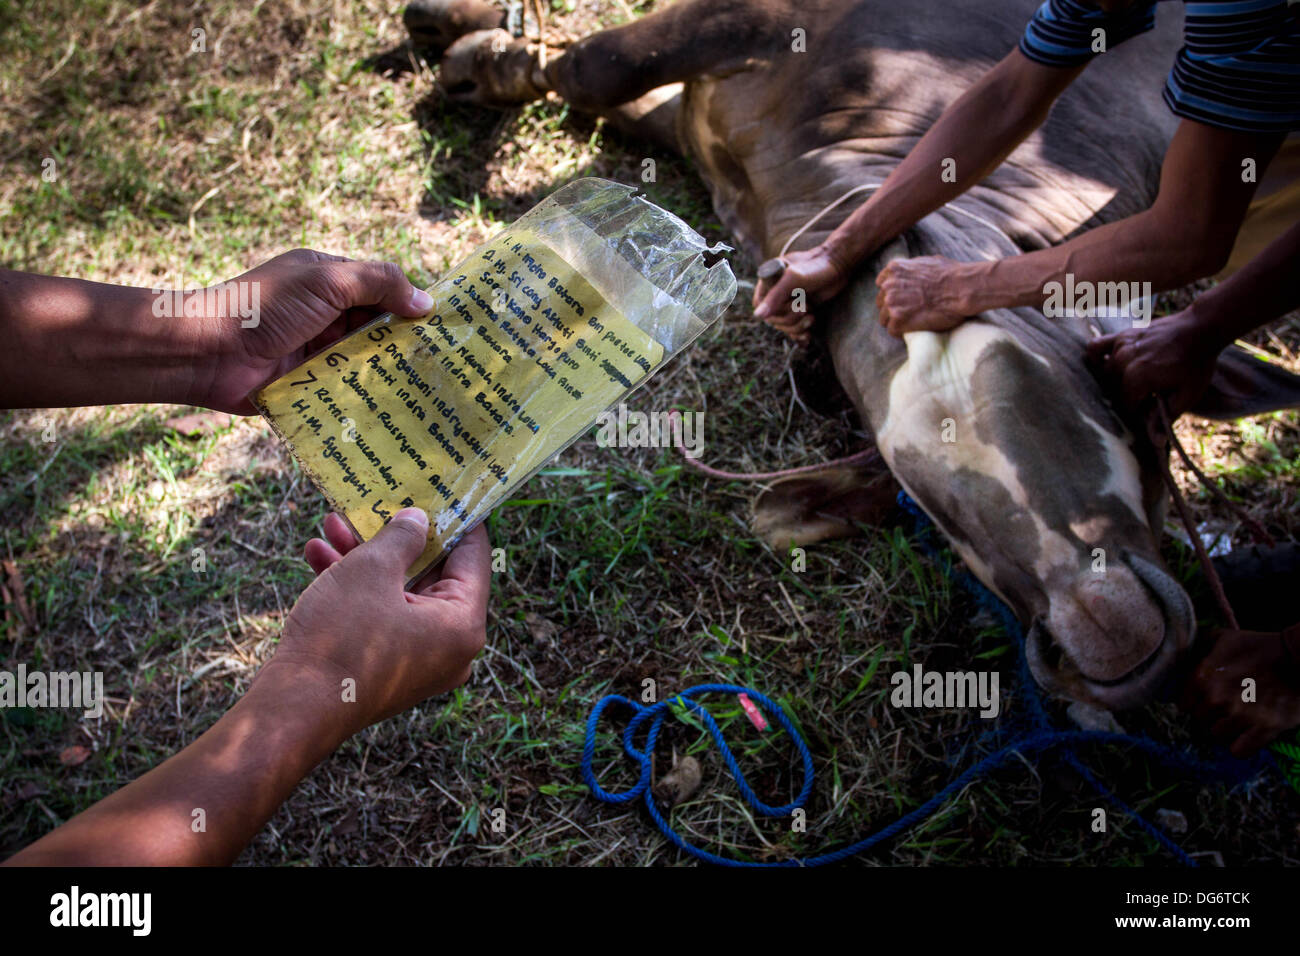 Serpong-Banten, Indonesia. 15th October 2013. Before slaughtered, event organizer announce the owner of the cow. Muslims in Indonesia celebrate Iedul Adha by slaughtering cows or sheep to give to the poor.  Credit:  Donal Husni/Alamy Live News Stock Photo